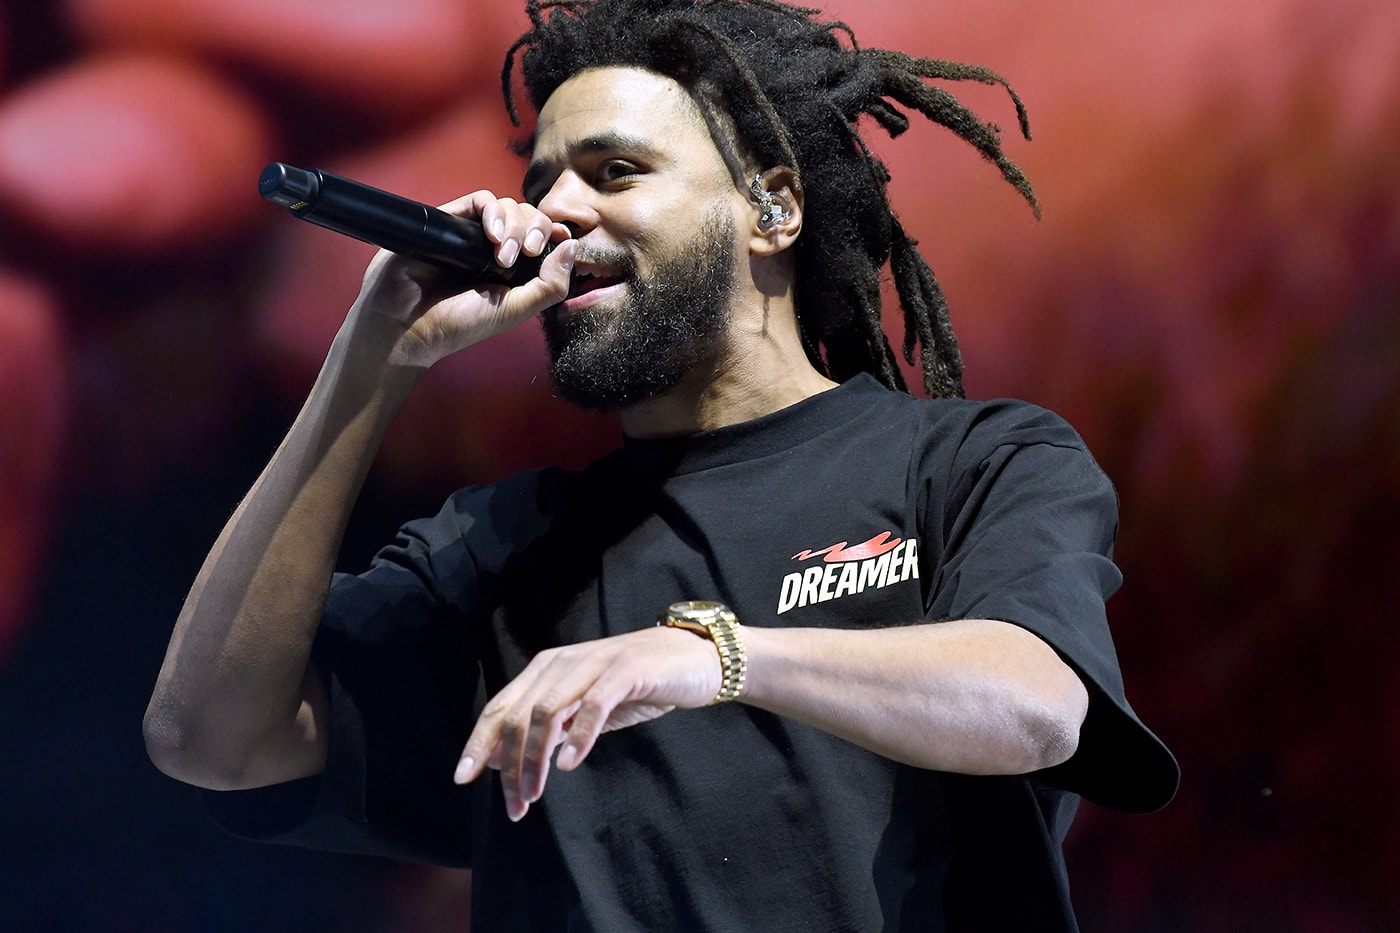 J. Cole Reveals He Does Not Charge for Features free bars verses soulja boy charges 1 million lil yachty